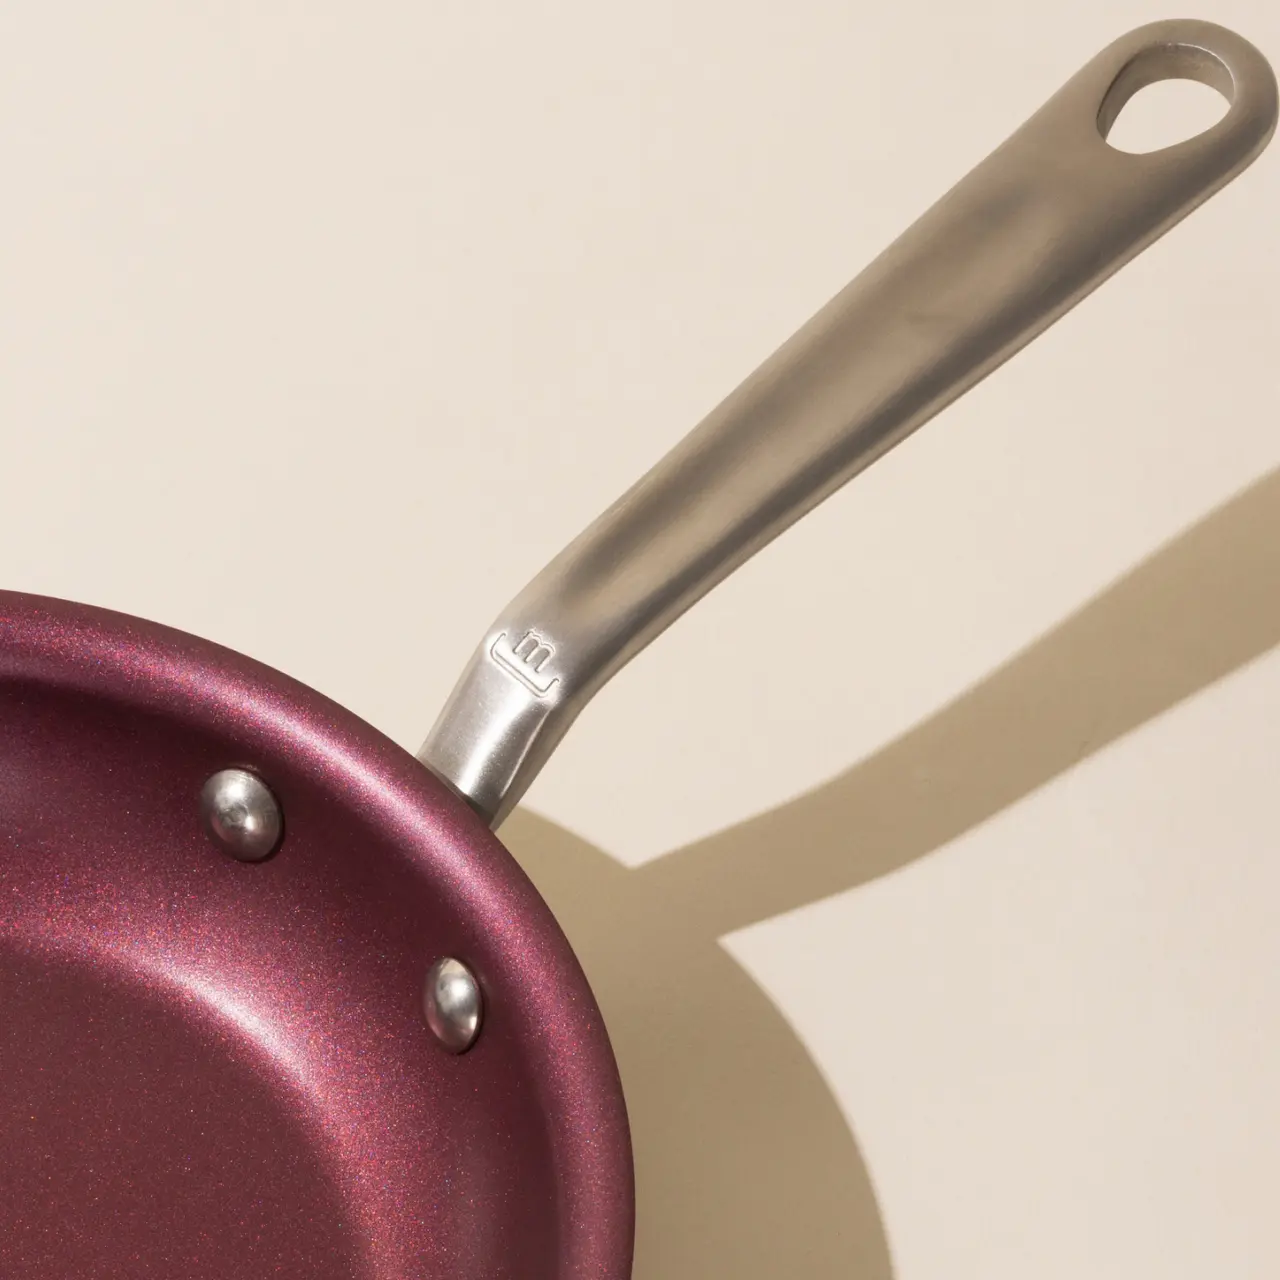 A burgundy non-stick frying pan with a silver handle cast a shadow on a light surface.